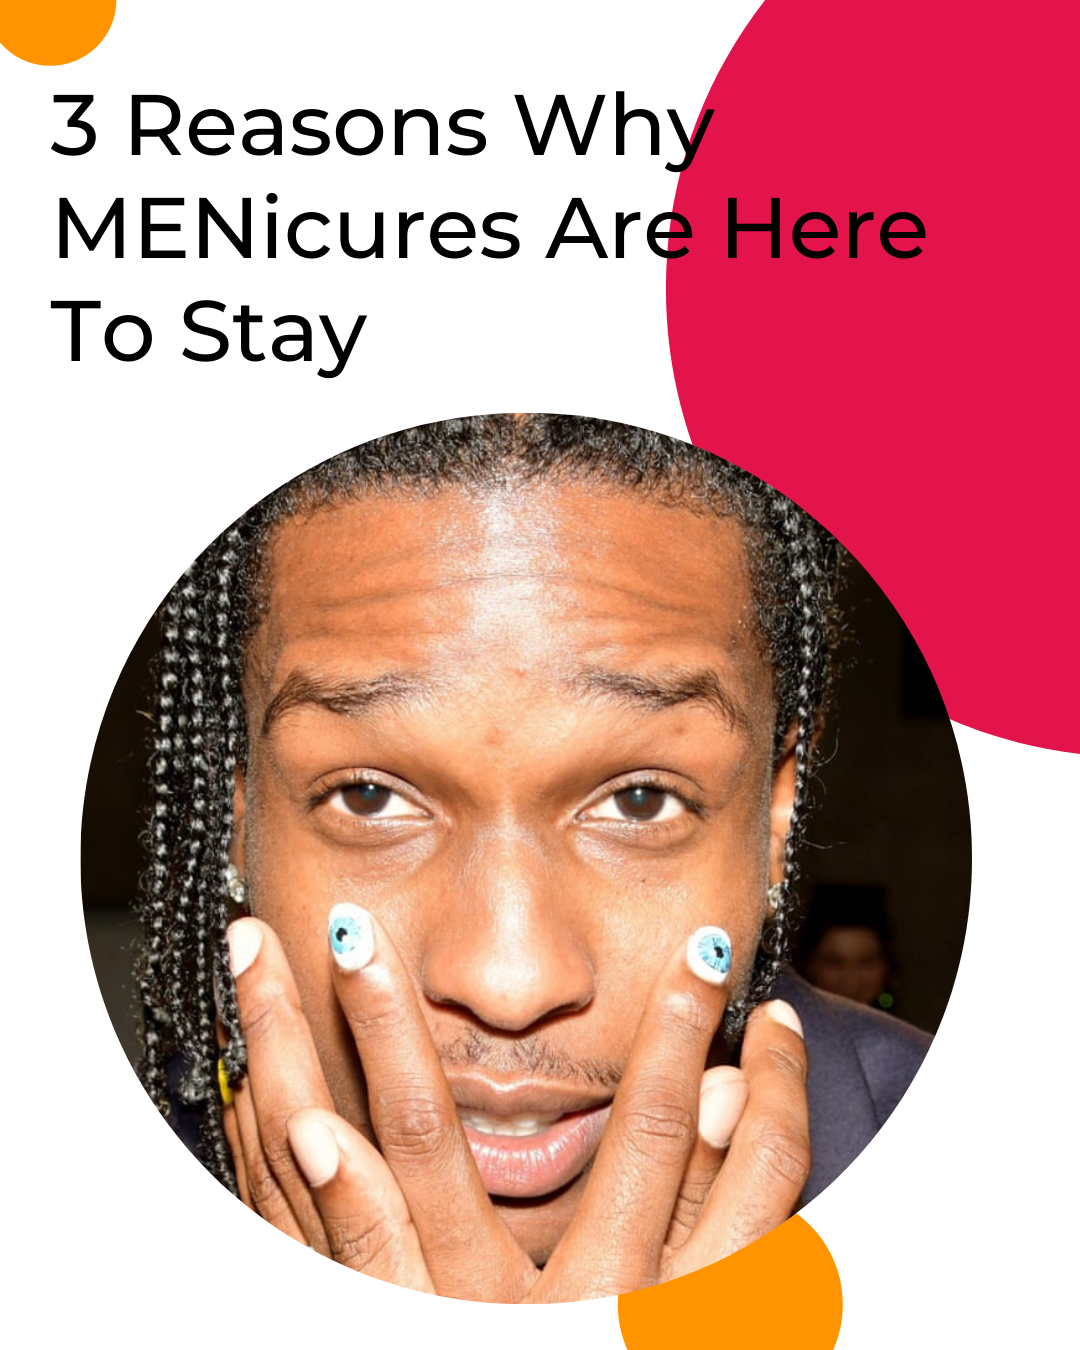 3 Reasons why MENicures are here to stay